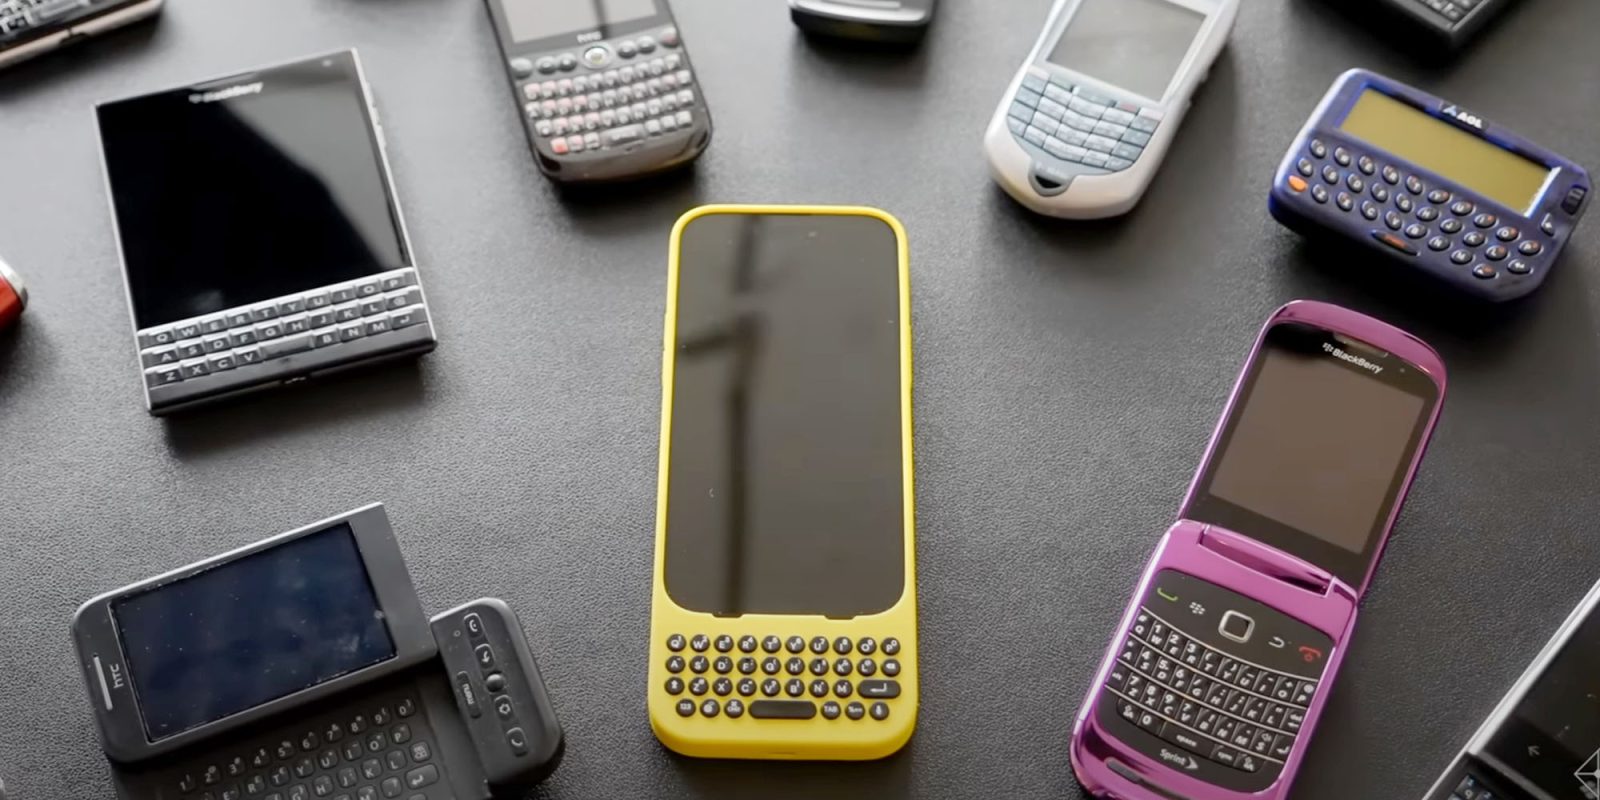 Hands-on with the Clicks iPhone keyboard case shows it delivers good demo